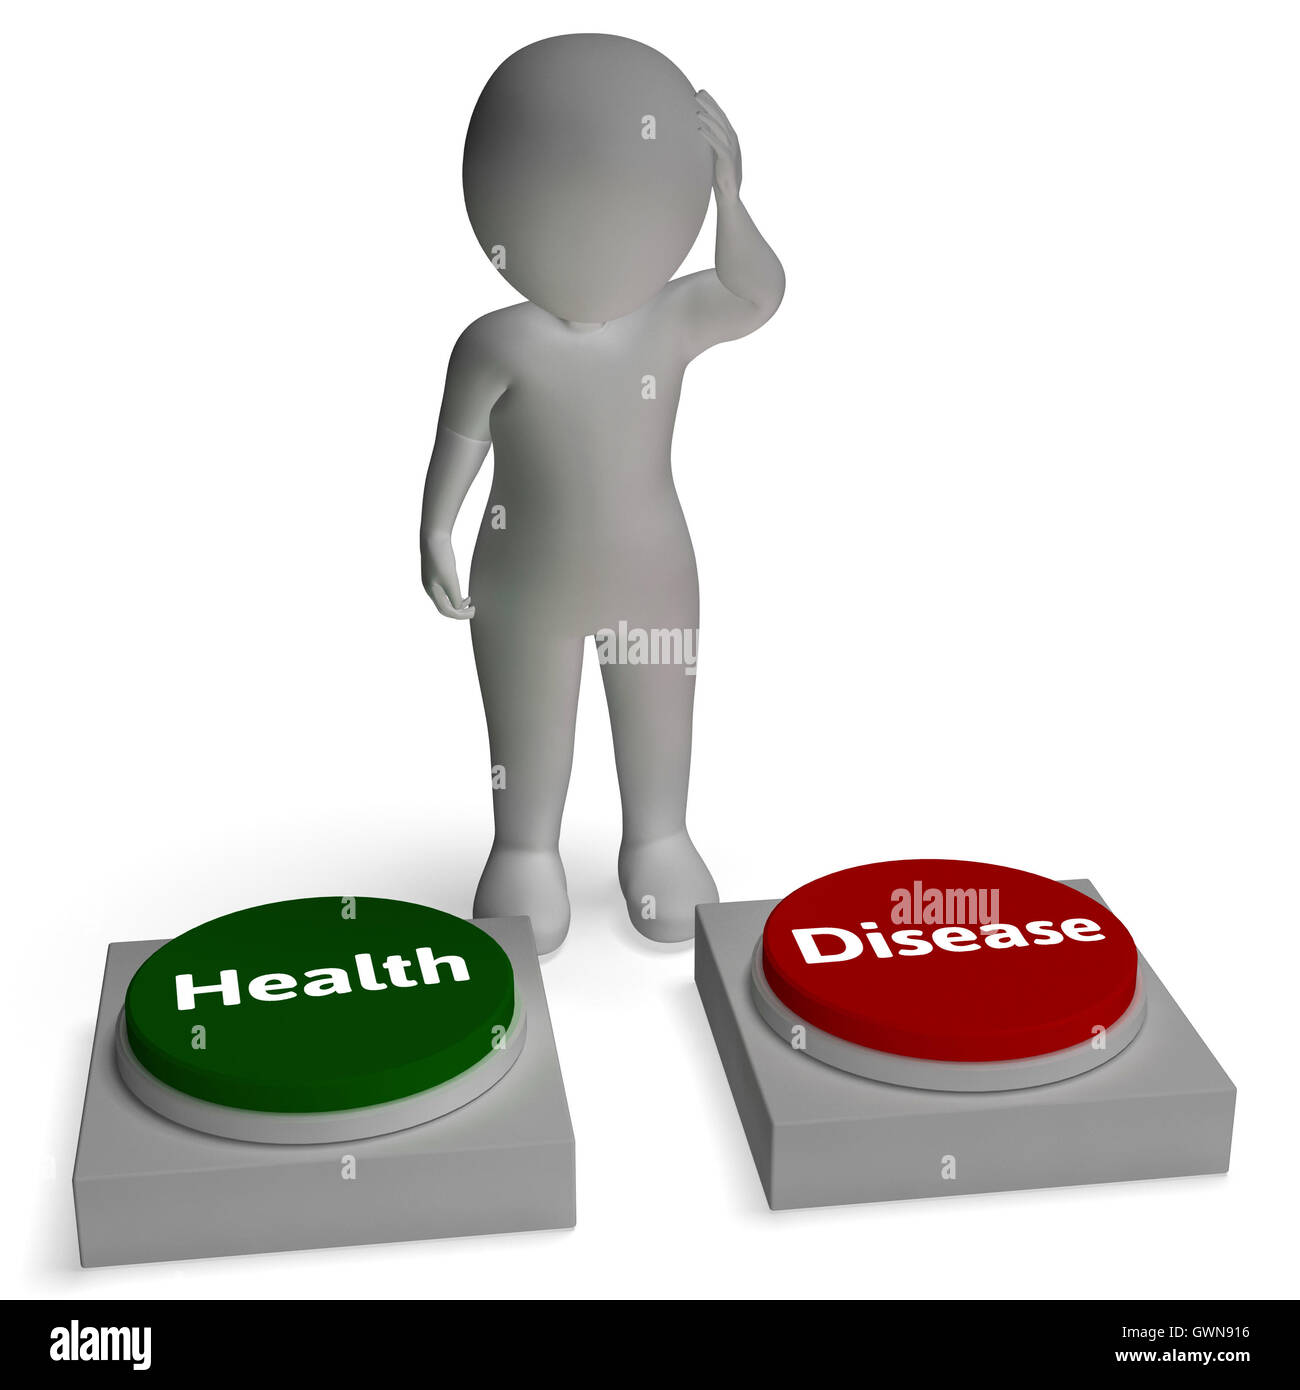 Health Disease Buttons Shows Healthcare Stock Photo